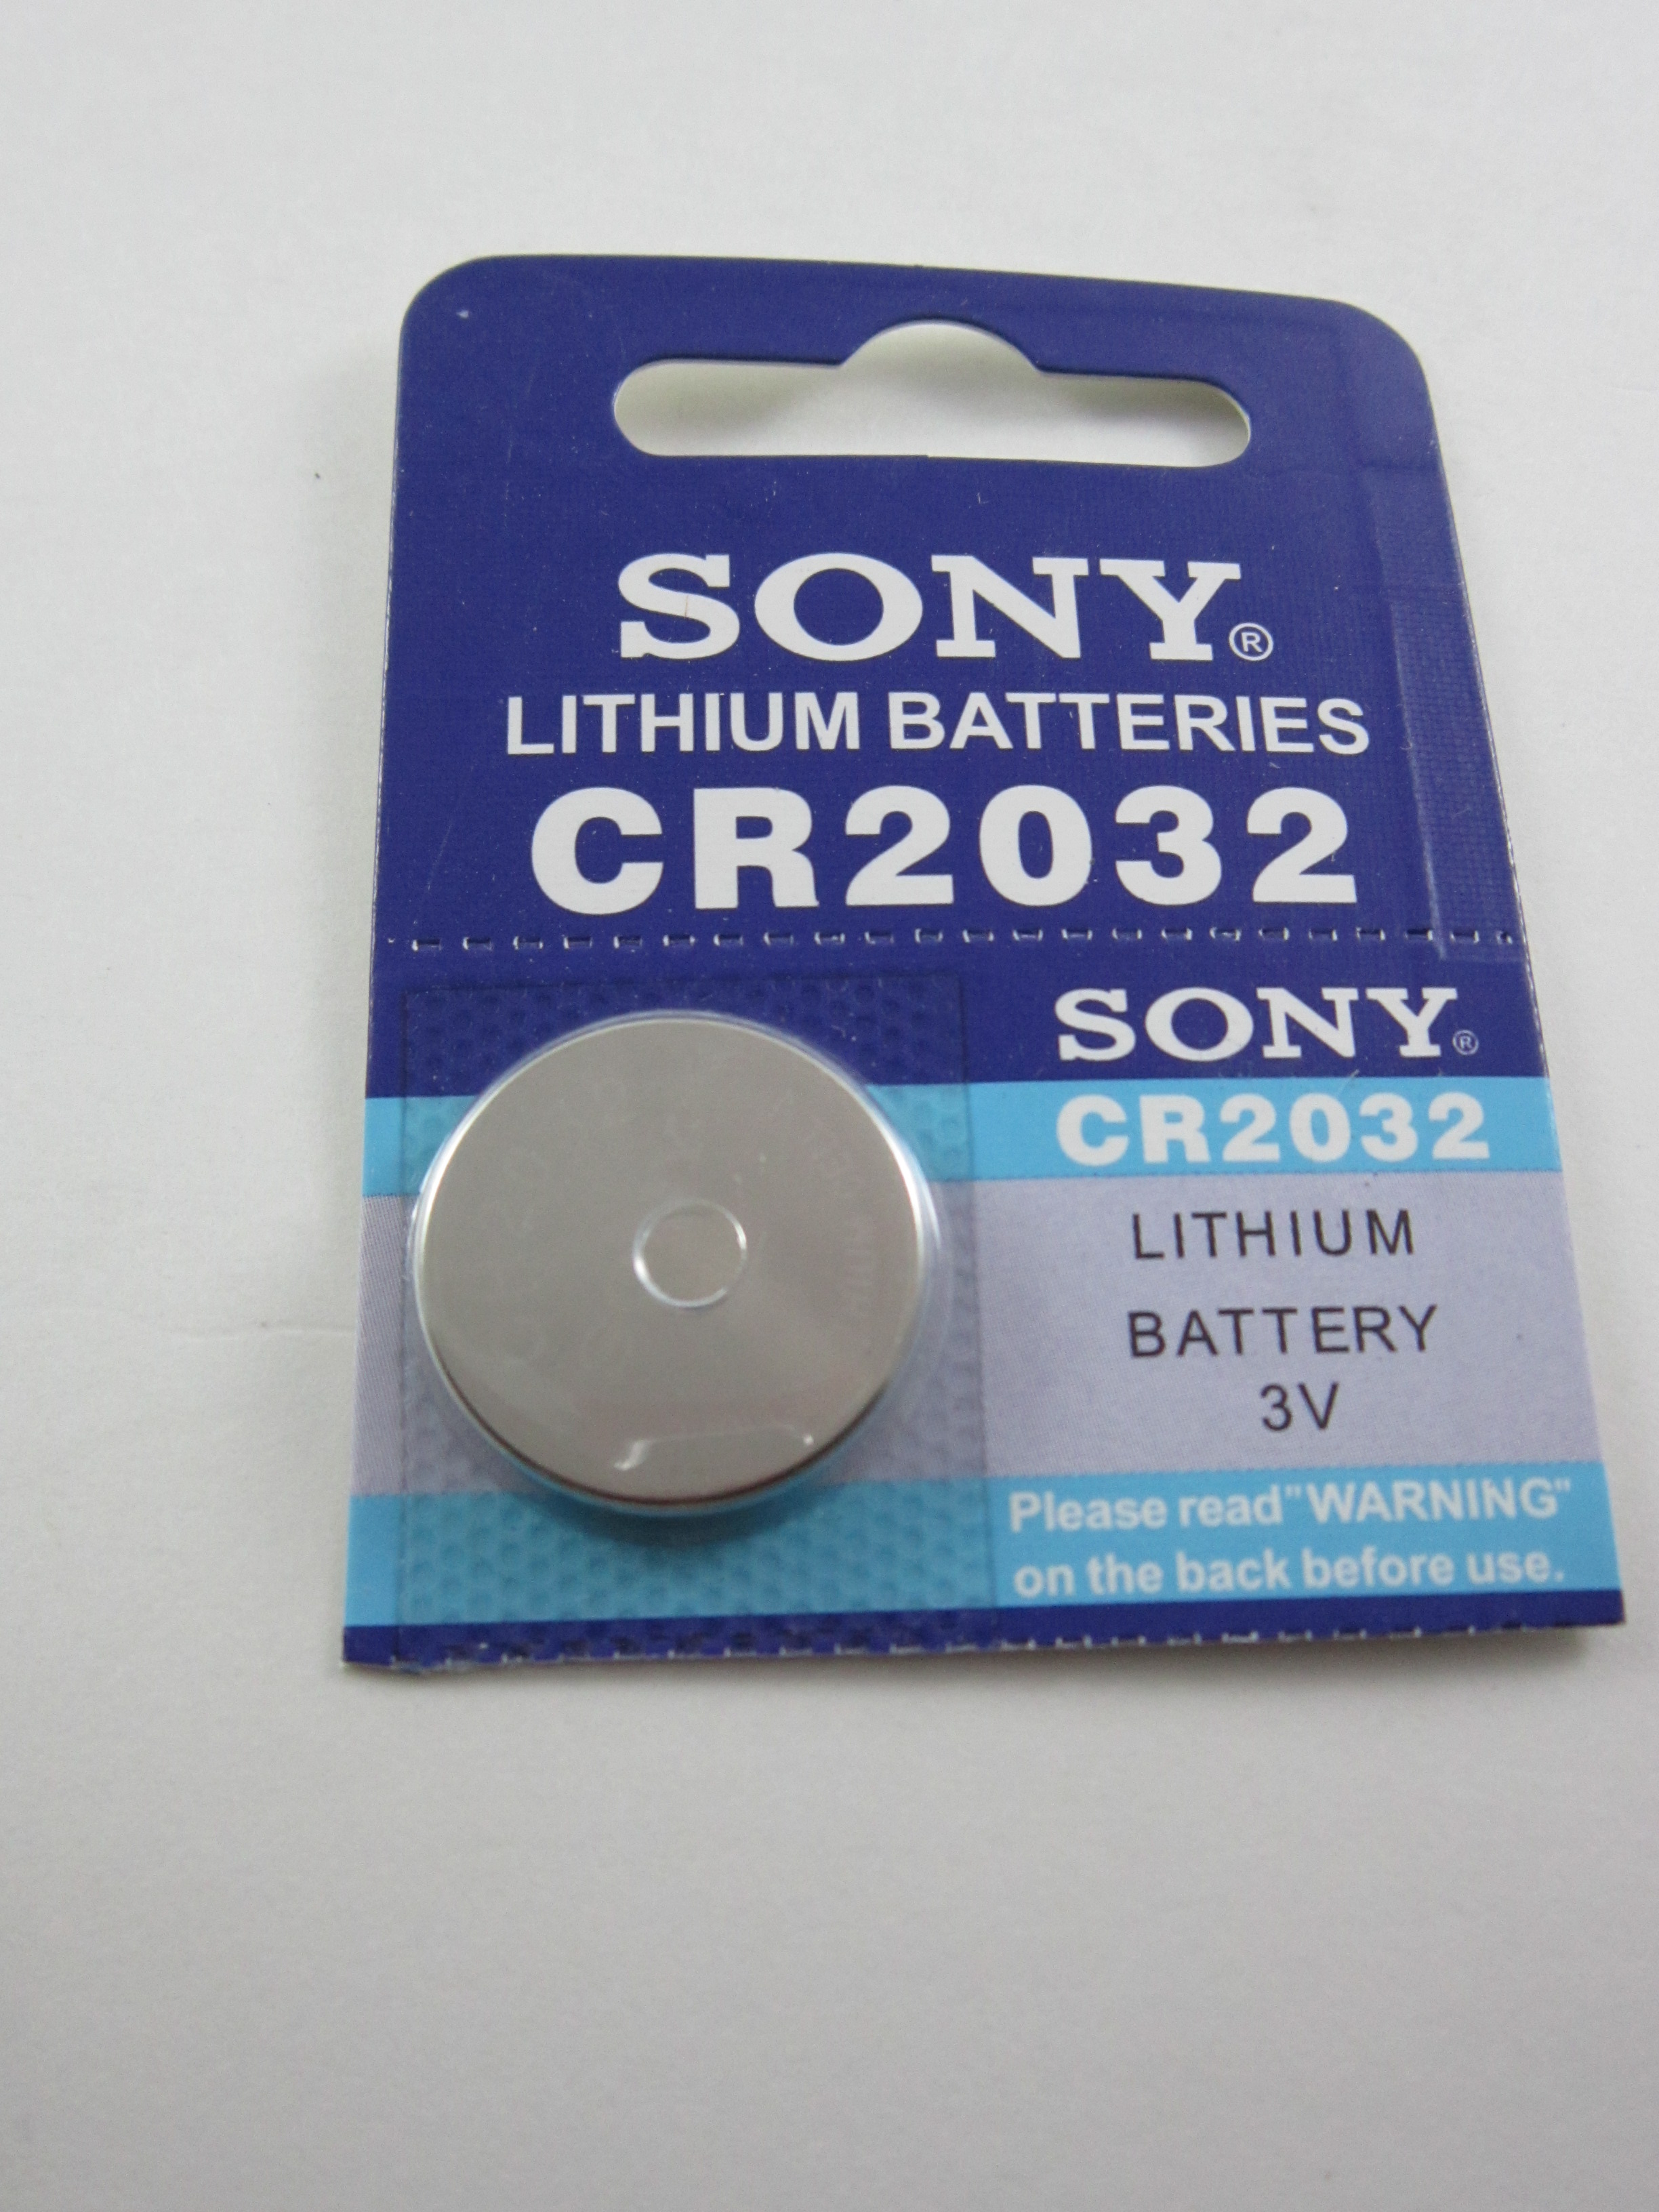 lithium coin battery sizes